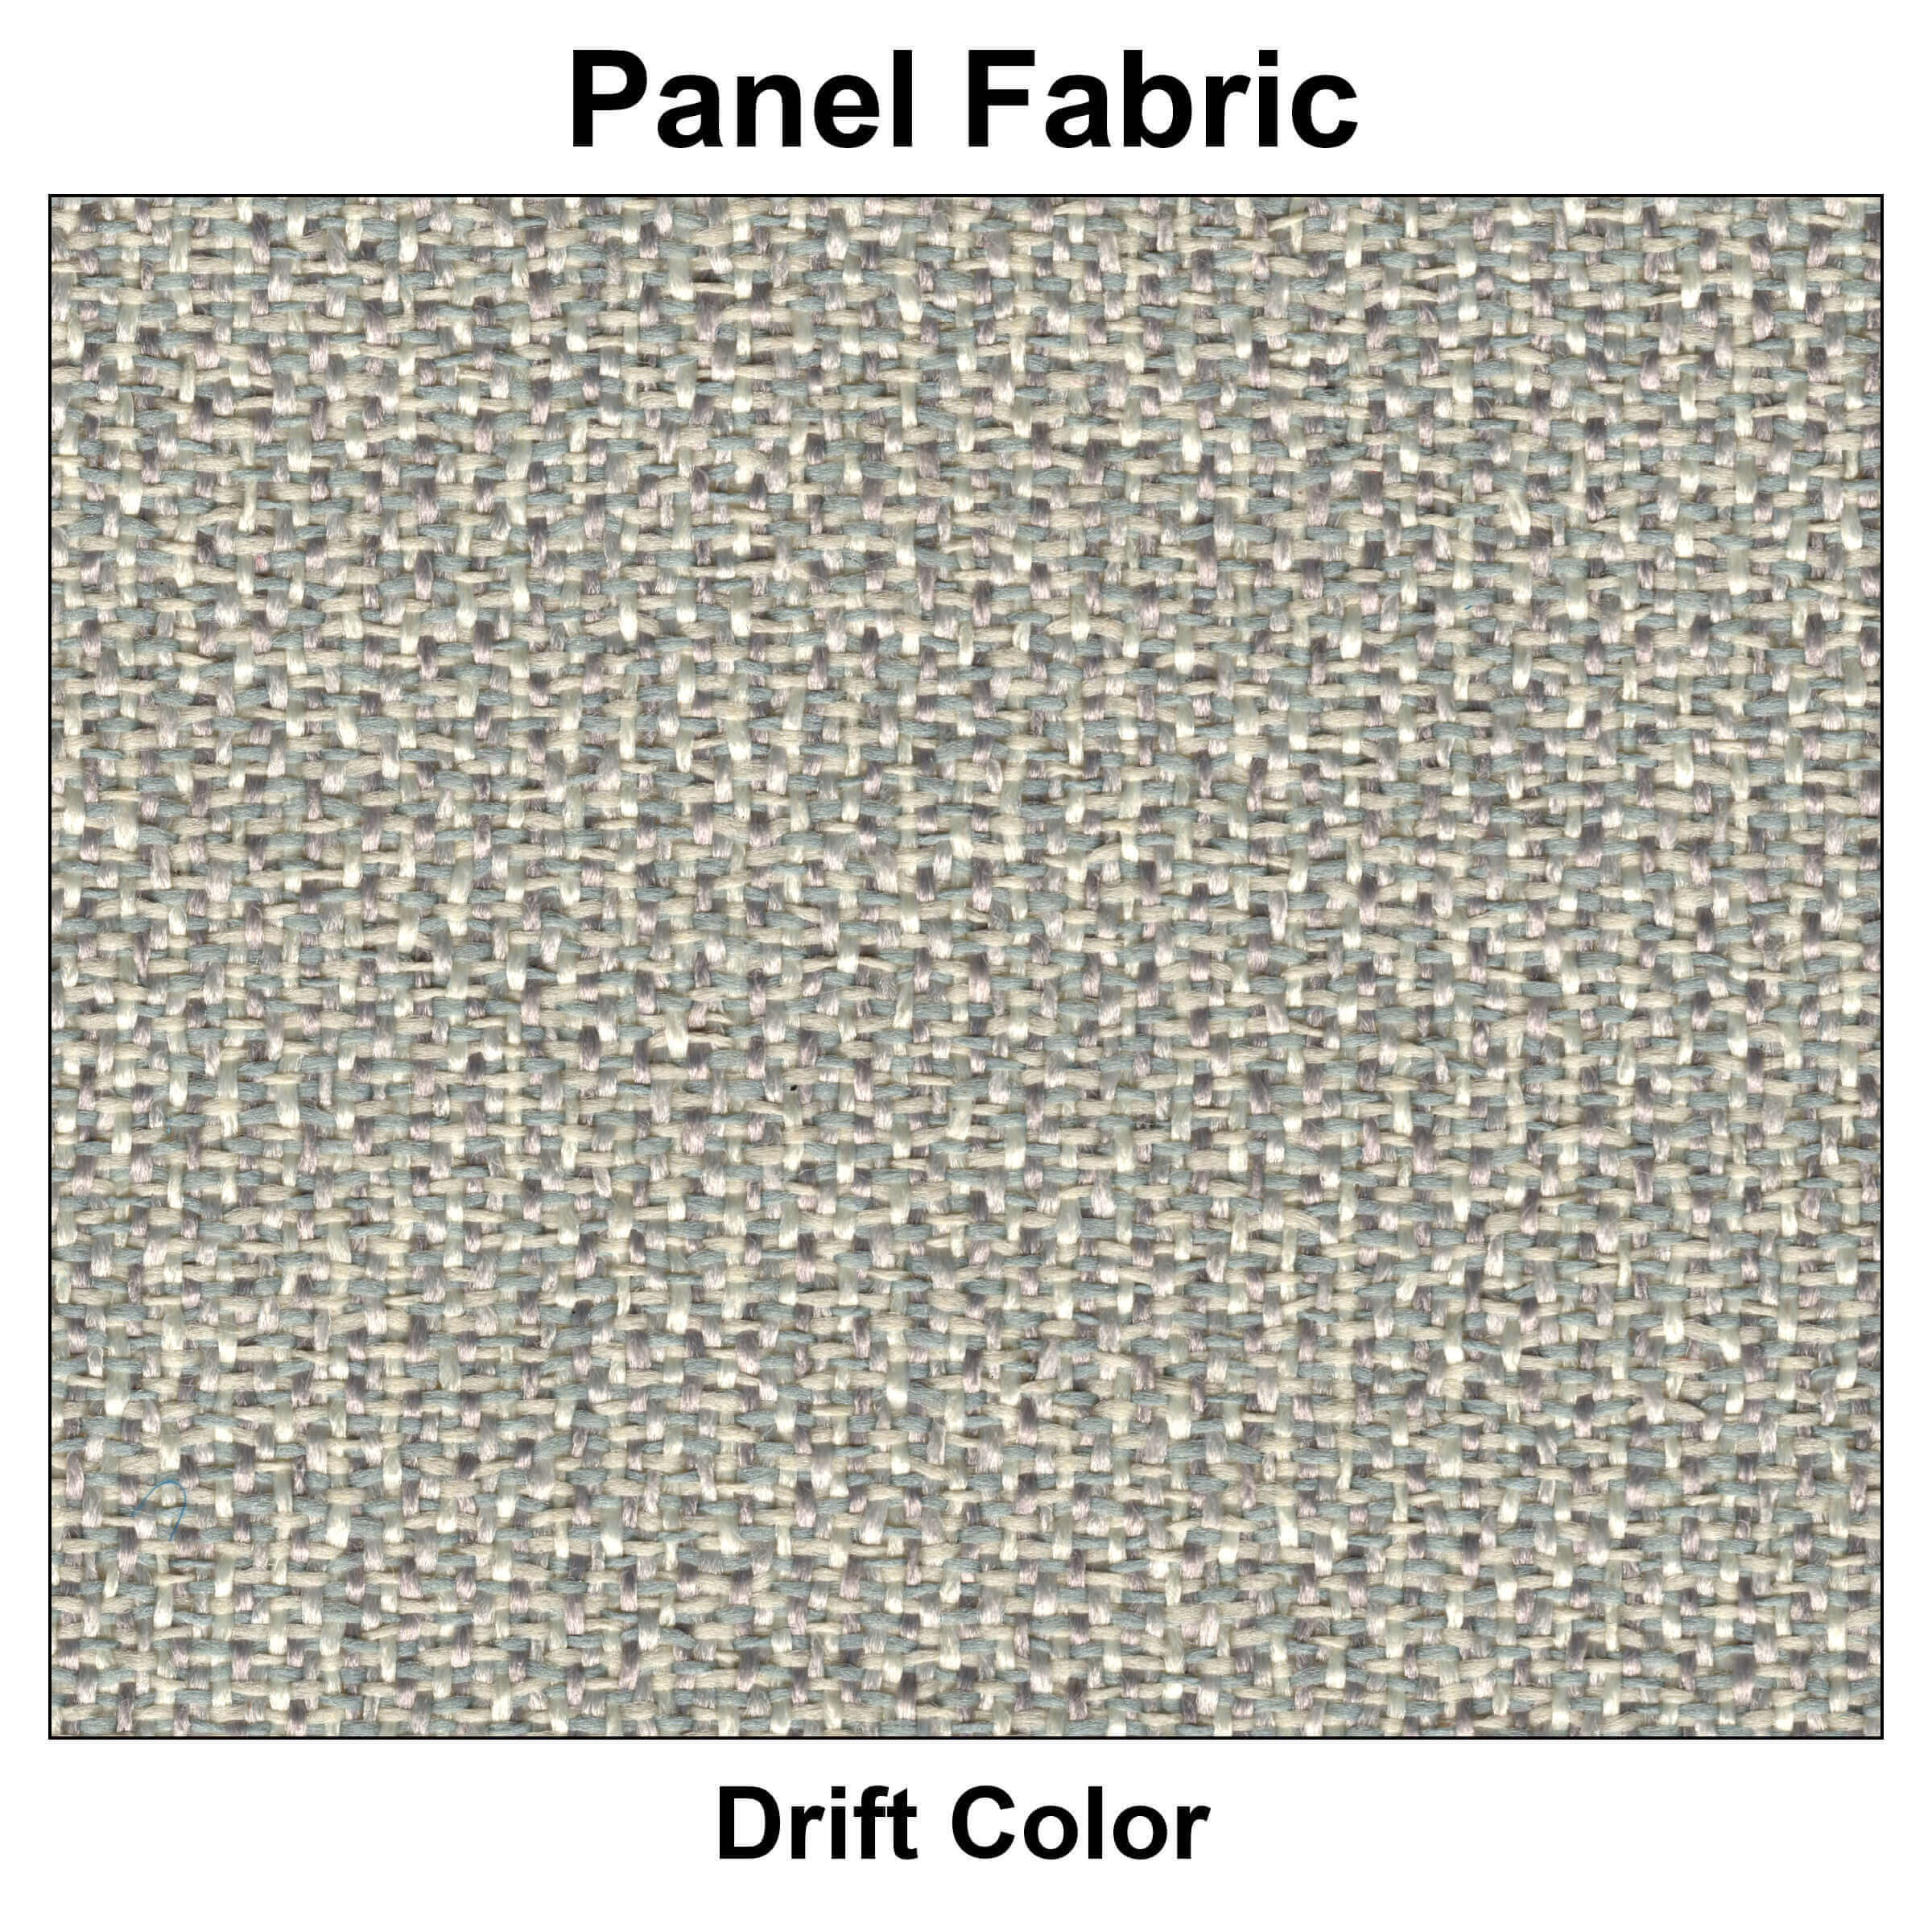 Cubicle fabric 1 1